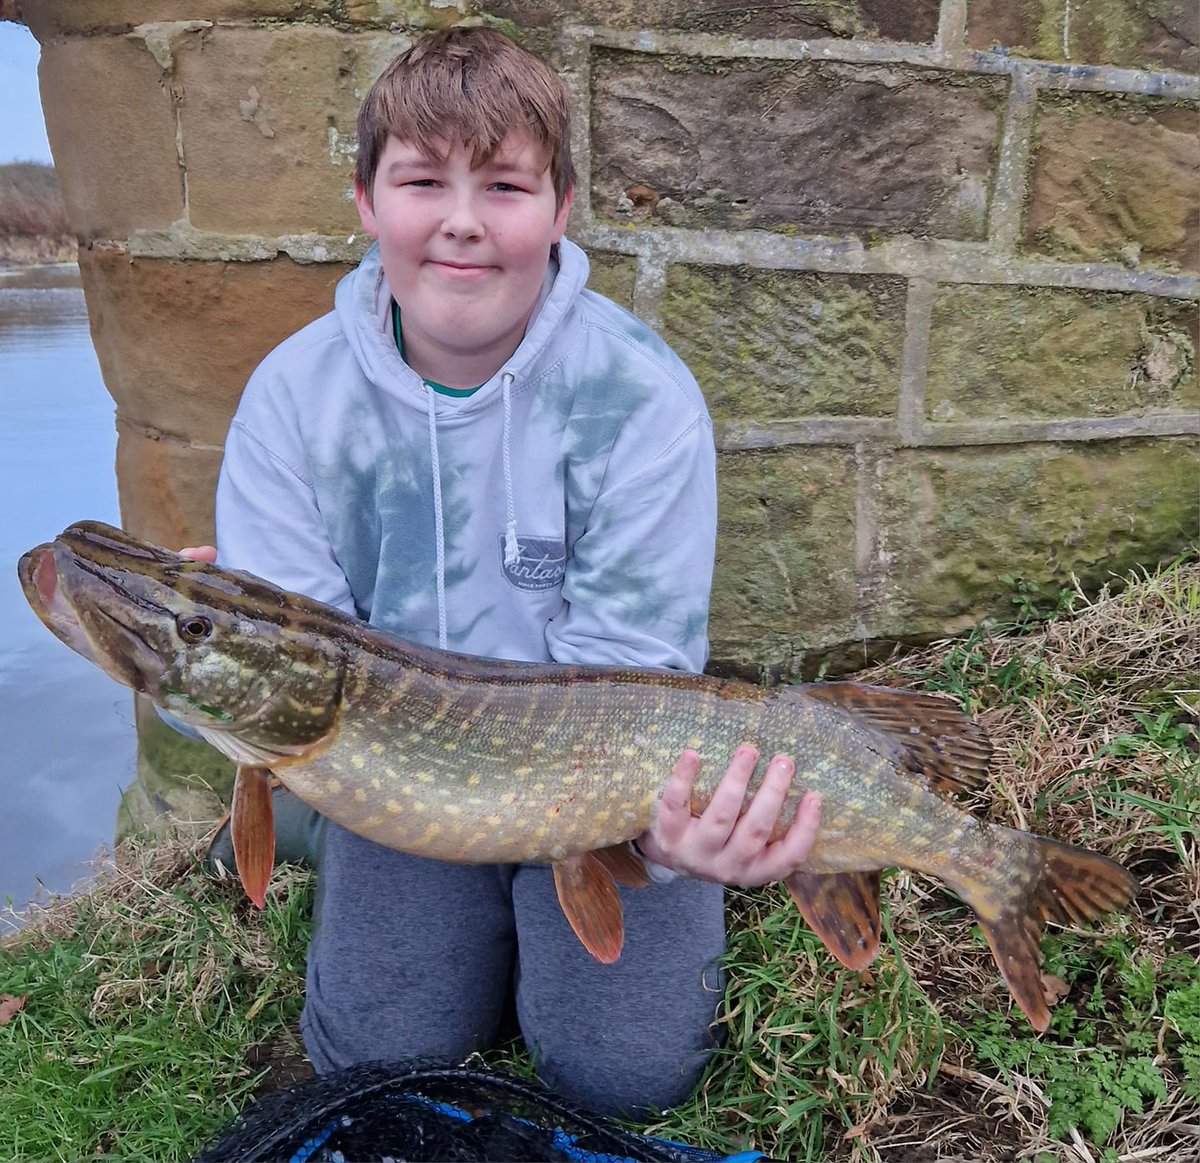 Big congratulations to our latest Catch of the Month winners for landing some impressive catches! 🎣 Each of them has earned fantastic prizes from our competition sponsors, Angling Direct and Leigh Tackle 🐟